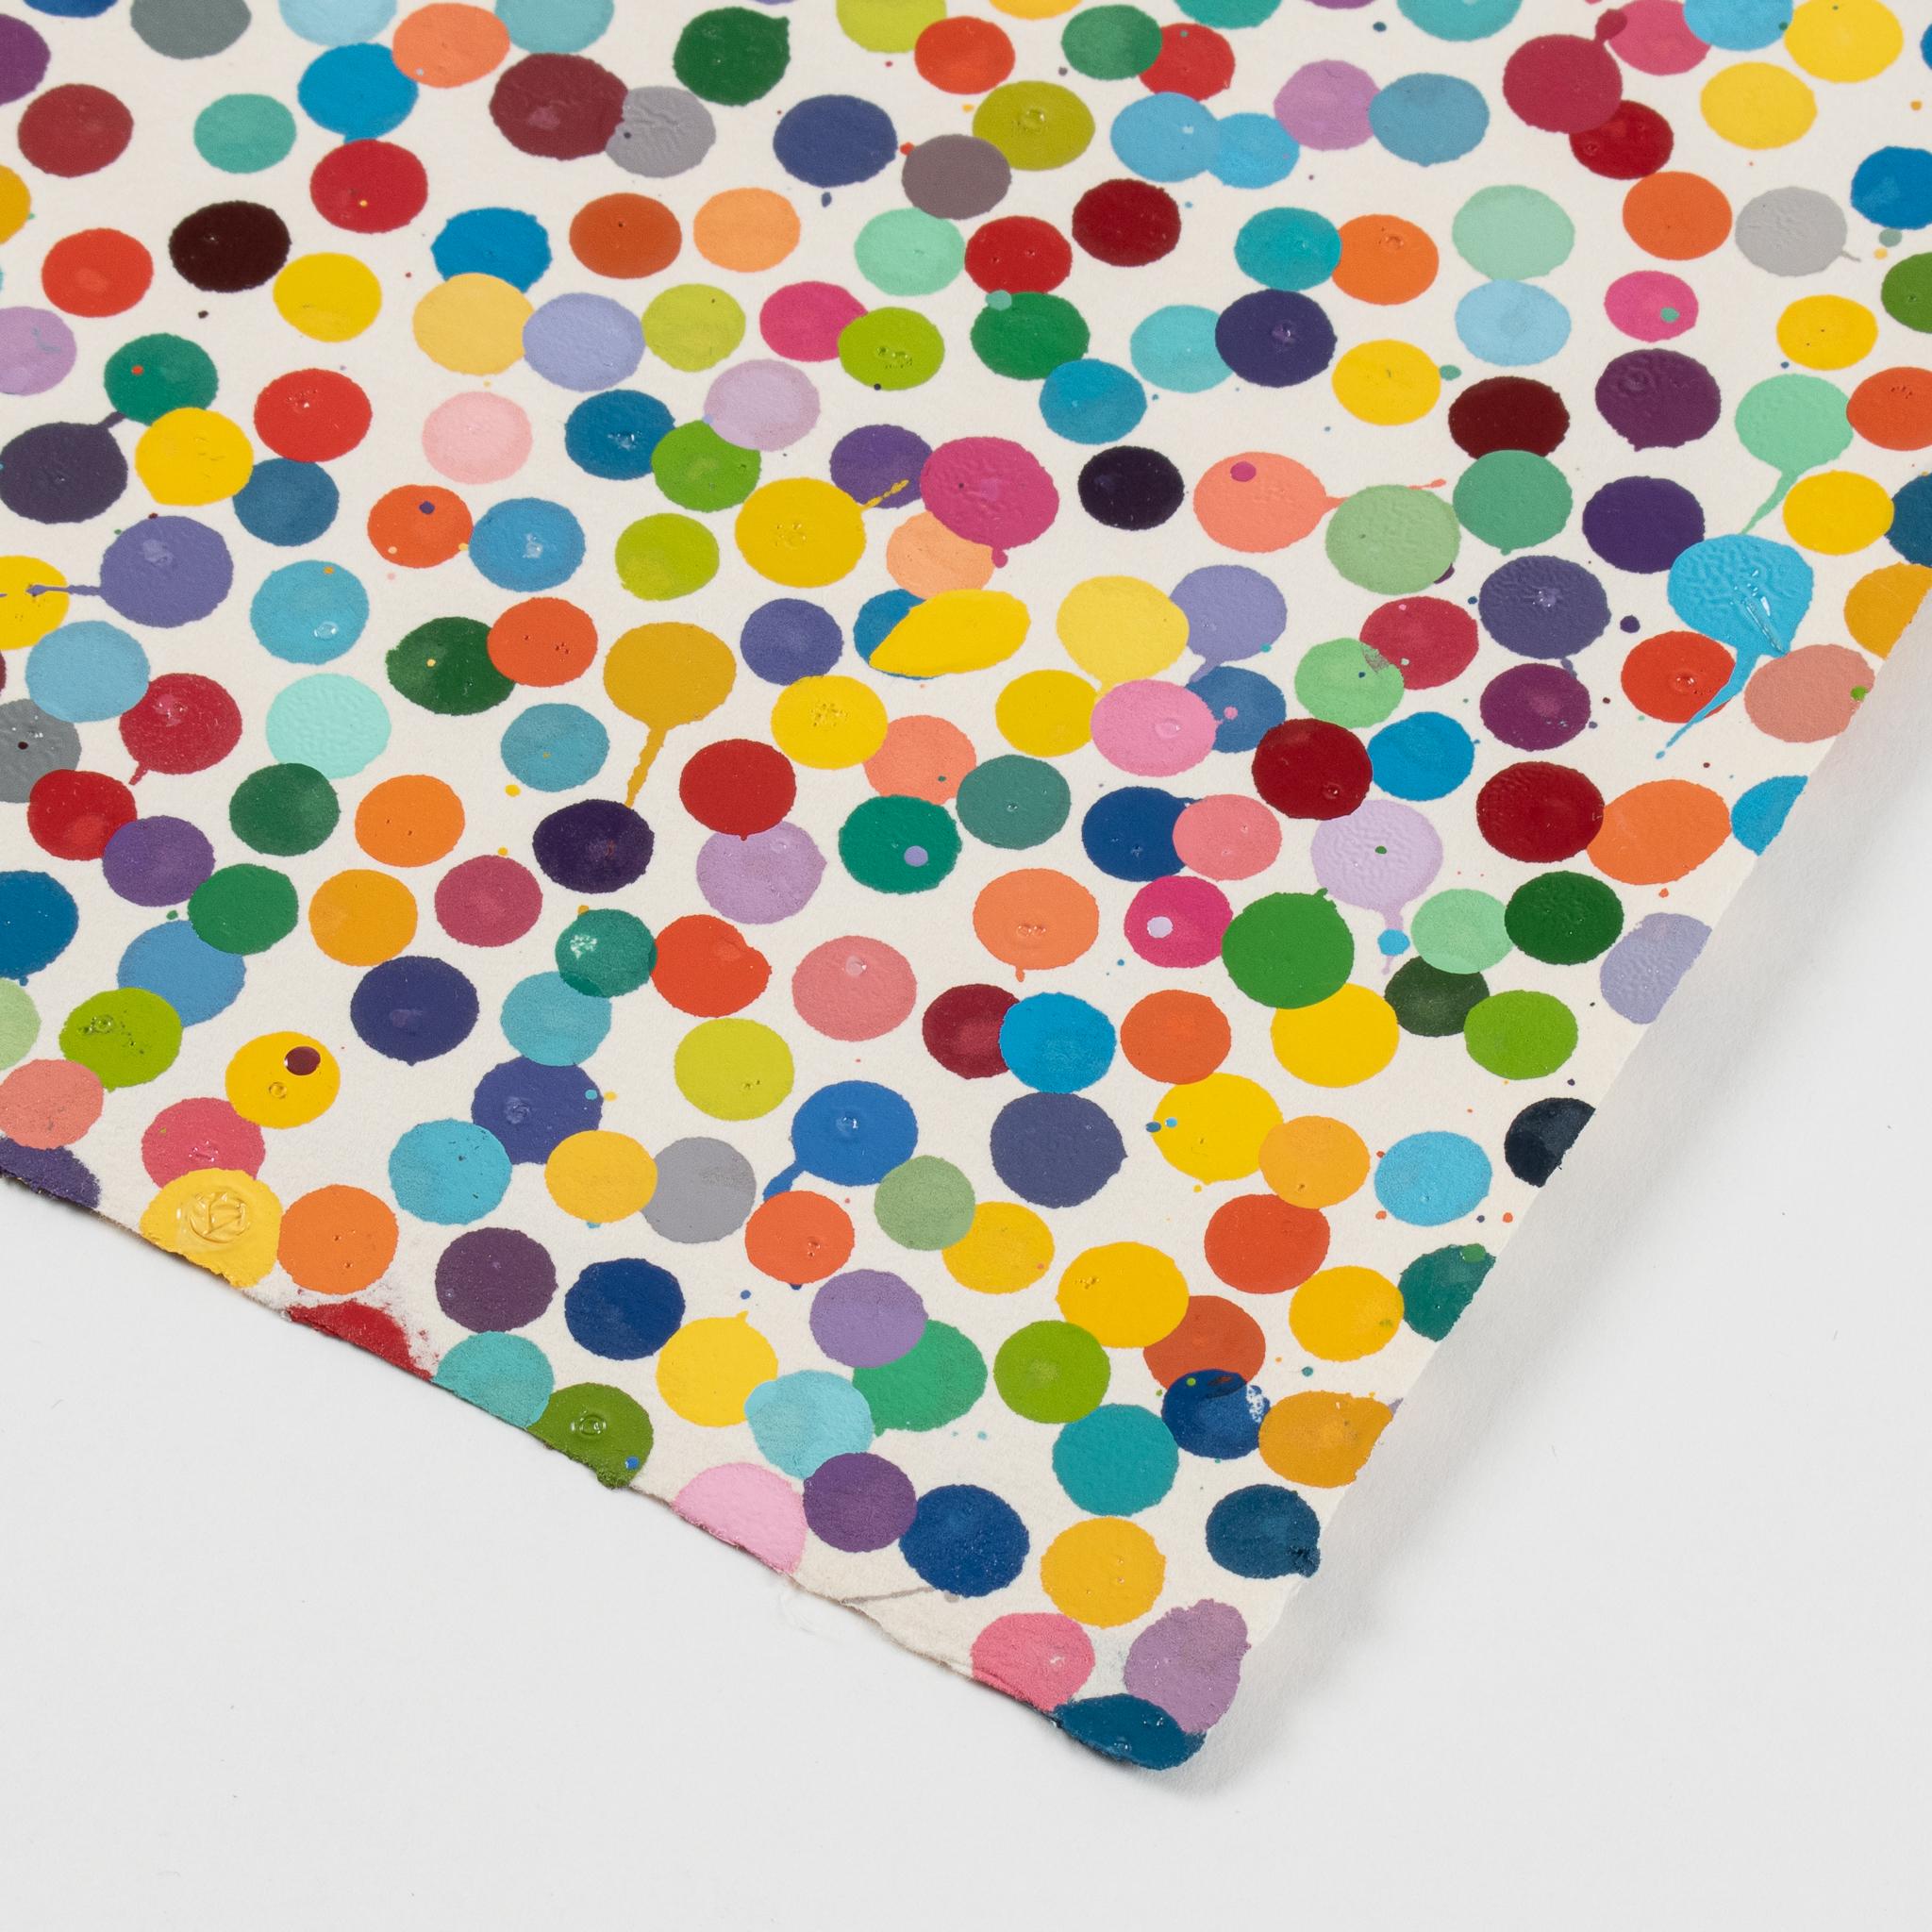 6168. Don't change a thing (from The Currency), Limited Edition Signed Art - Print by Damien Hirst